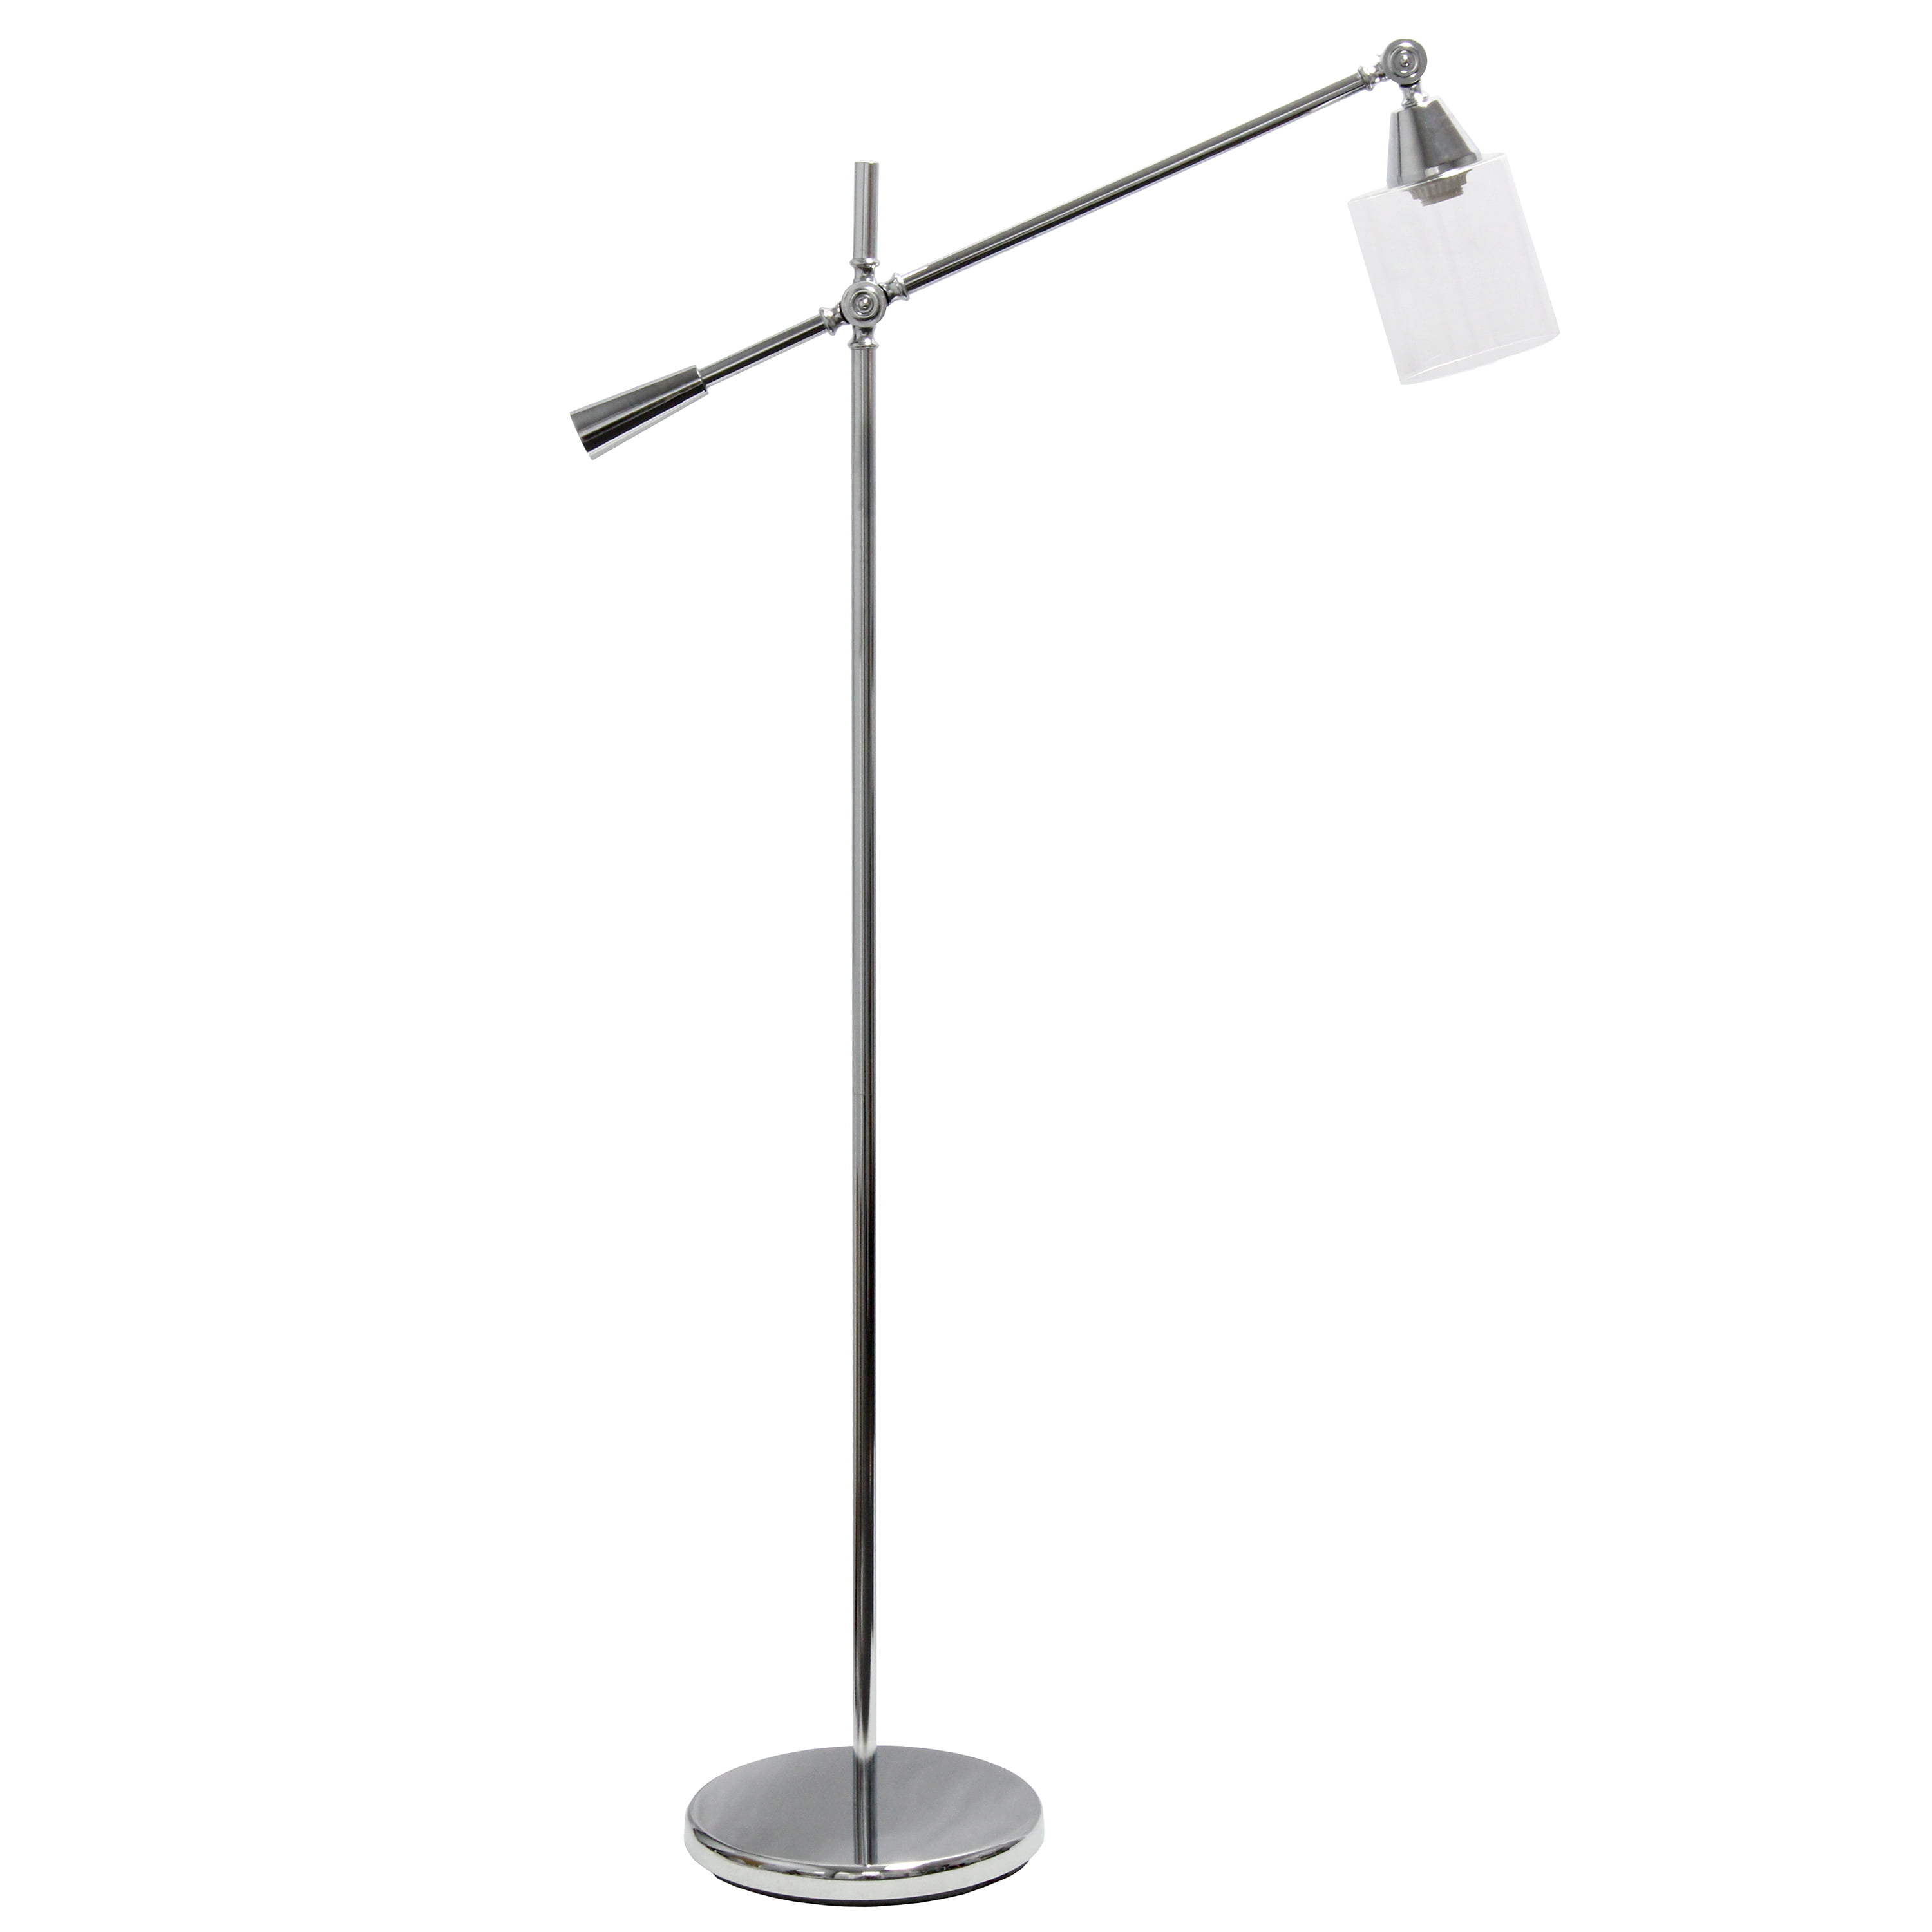 Lalia Home Swing Arm Floor Lamp with Clear Glass Cylindrical Shade, Chrome